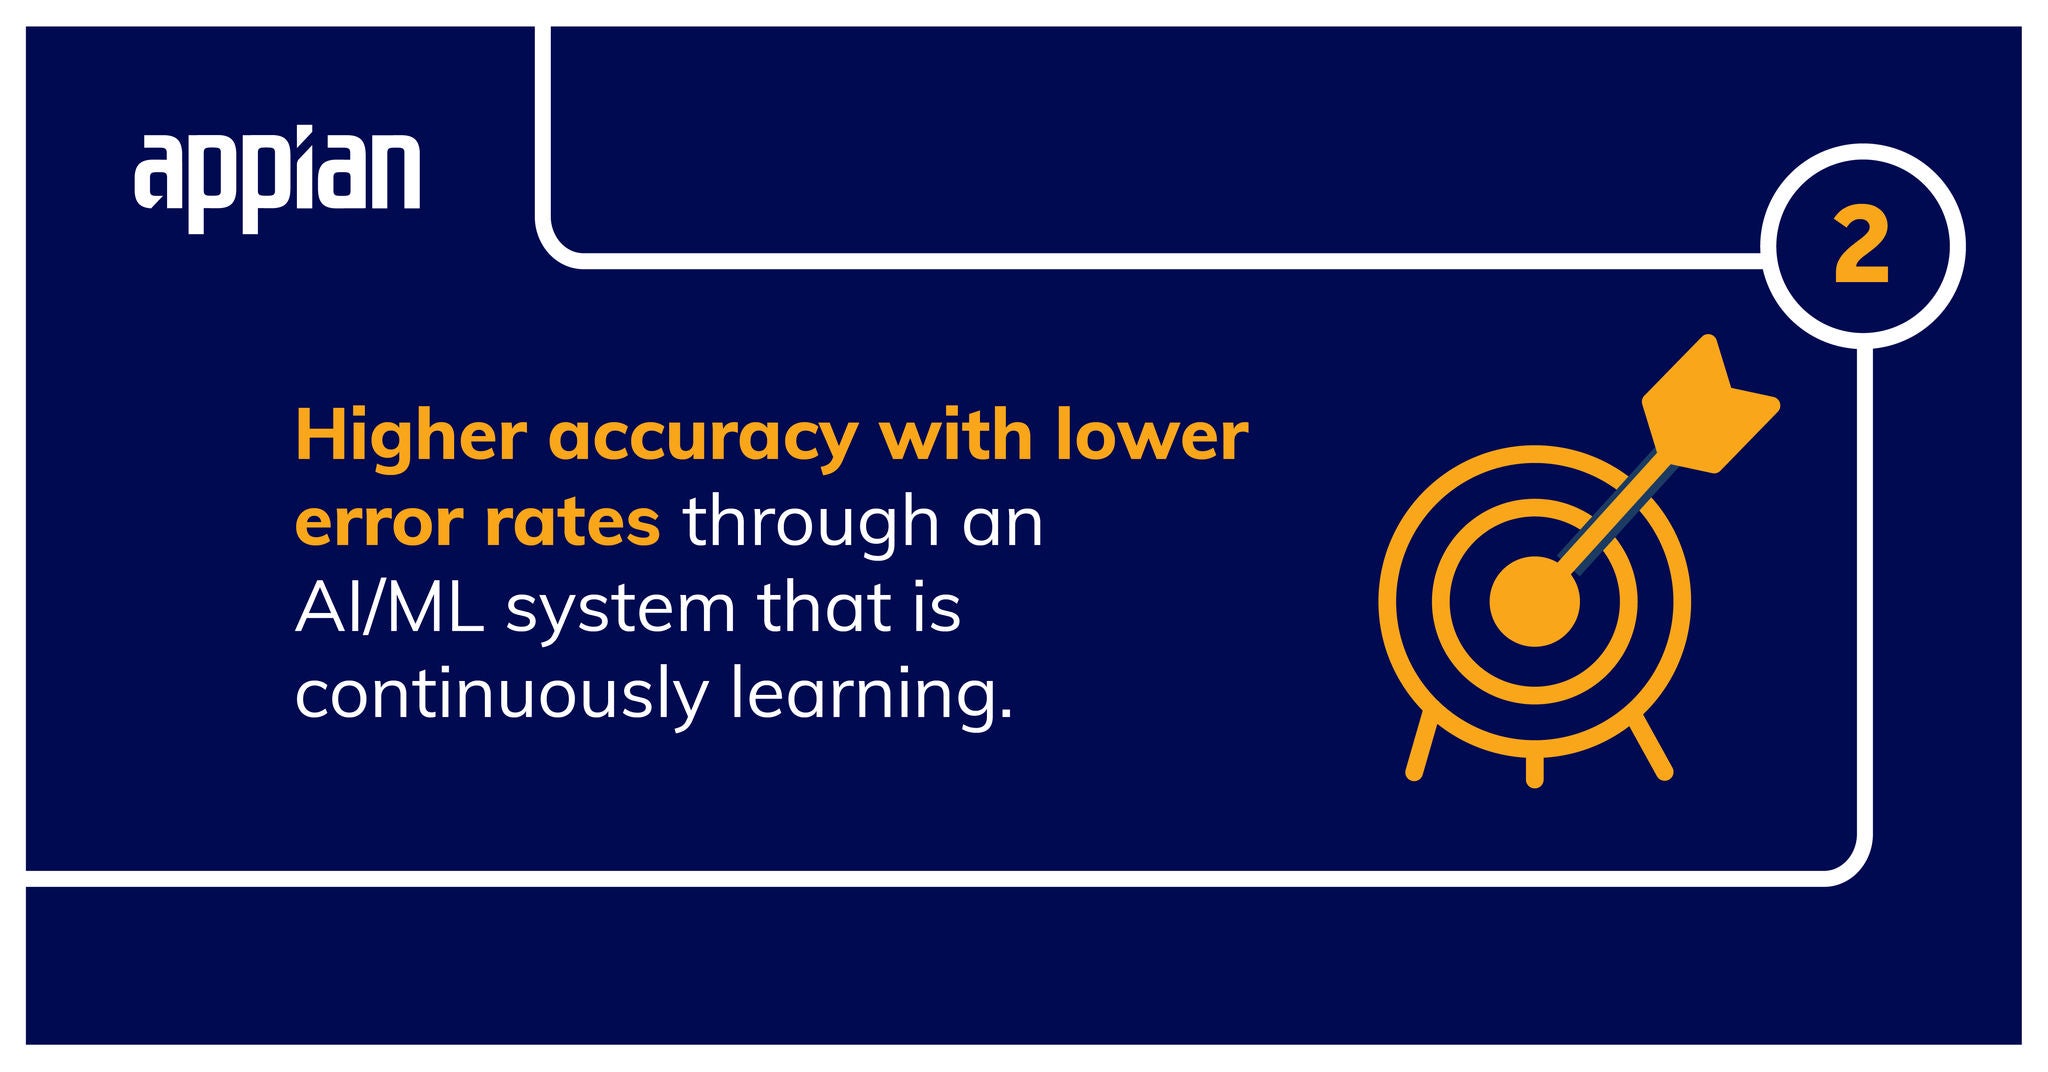 Higher accuracy with lower error rates through an AI/ML system that is continuously learning.